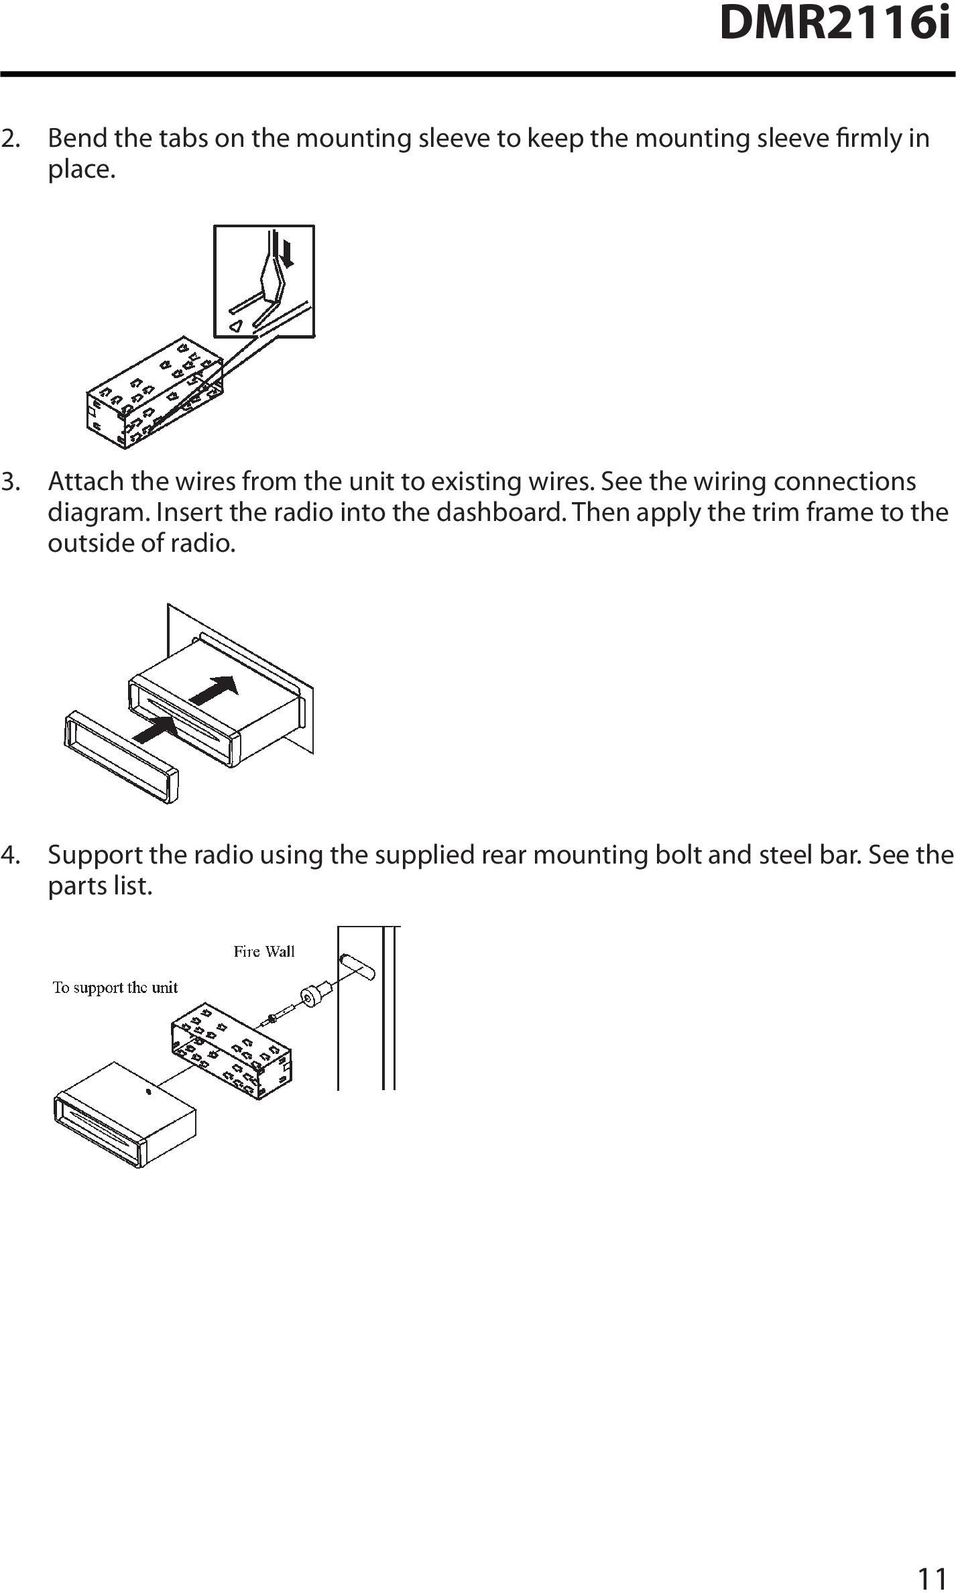 Attach the wires from the unit to existing wires. See the wiring connections diagram.